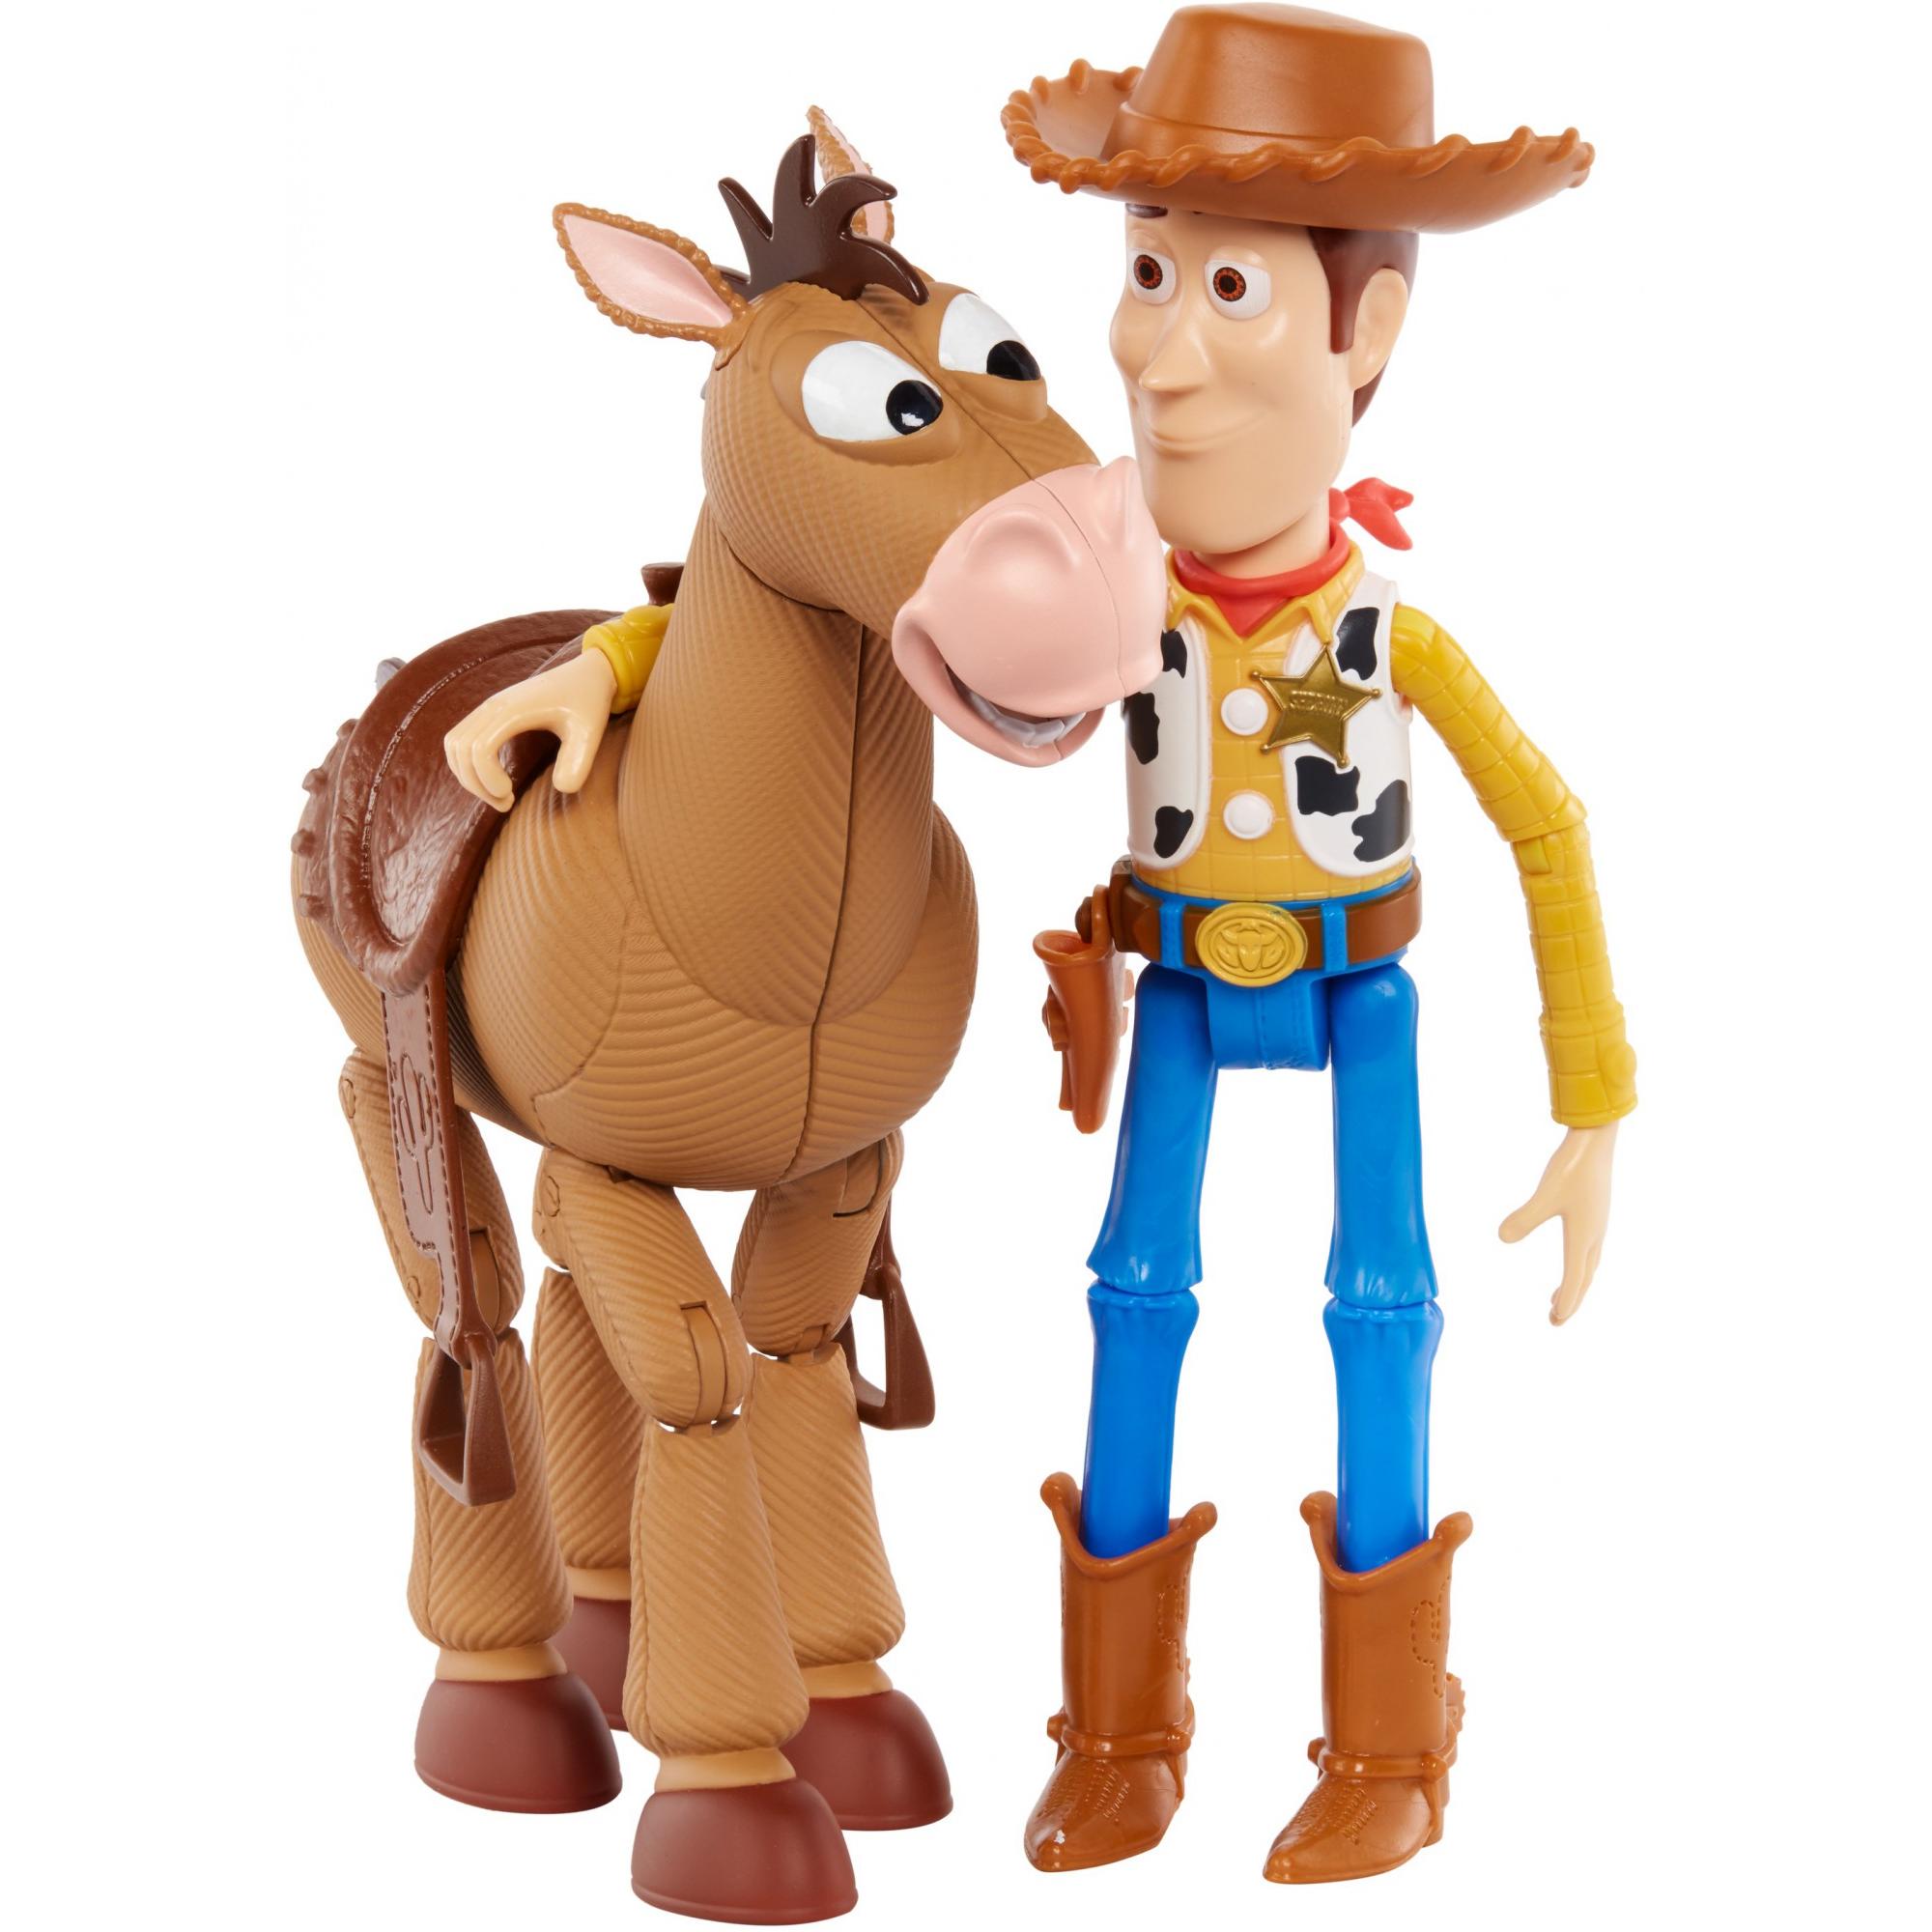 Award Winning Disney/Pixar Toy Story 4 Woody And Buzz Lightyear 2-Character Pack, Movie-Inspired Relative-Scale For Storytelling Play - image 5 of 8